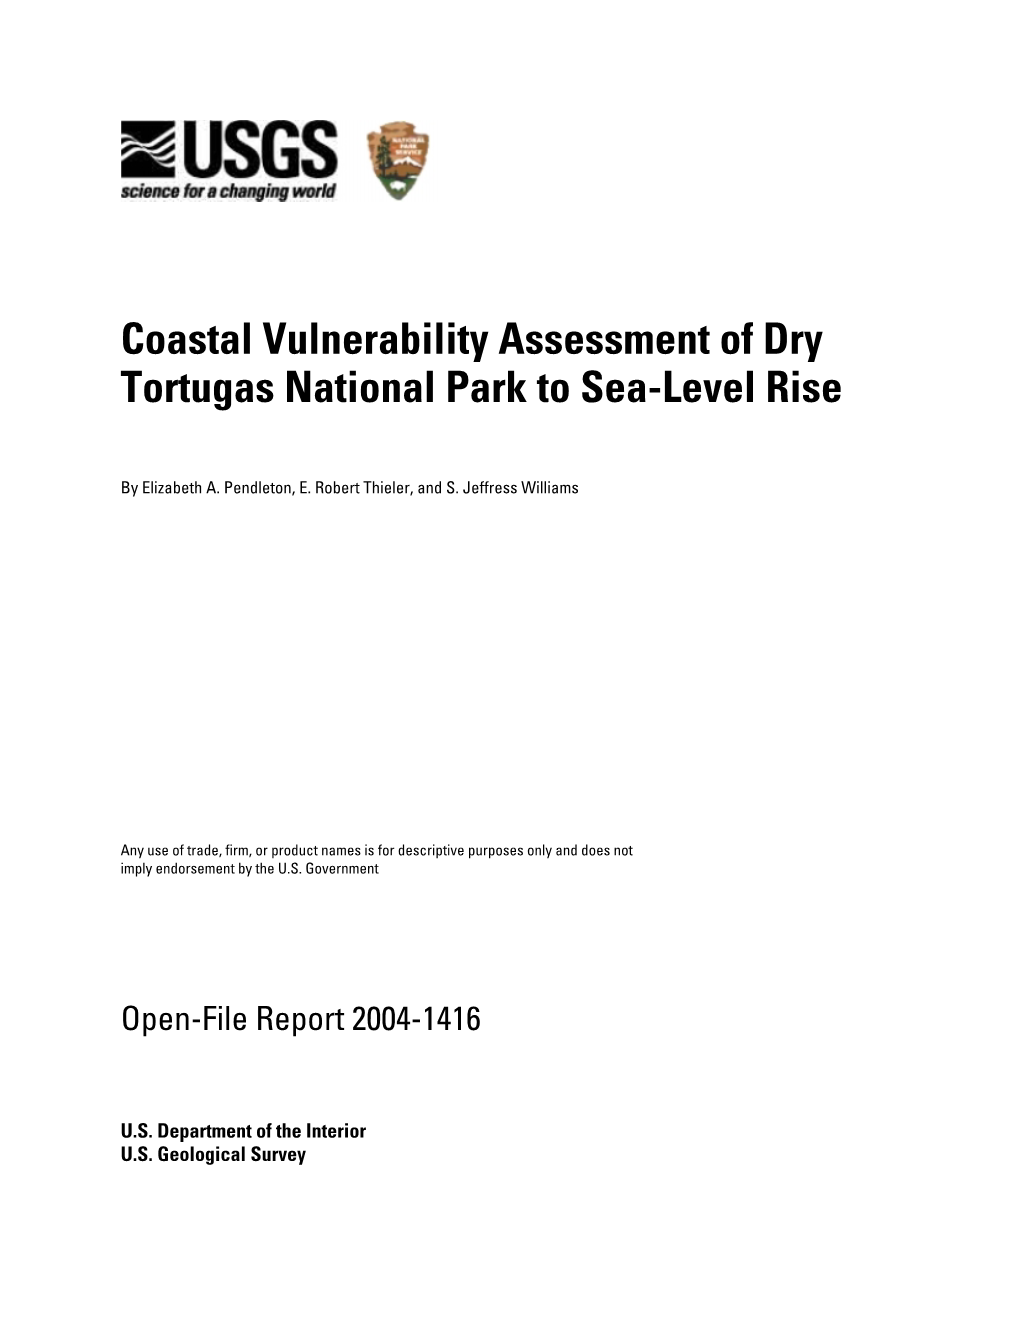 Coastal Vulnerability Assessment of Dry Tortugas National Park to Sea-Level Rise